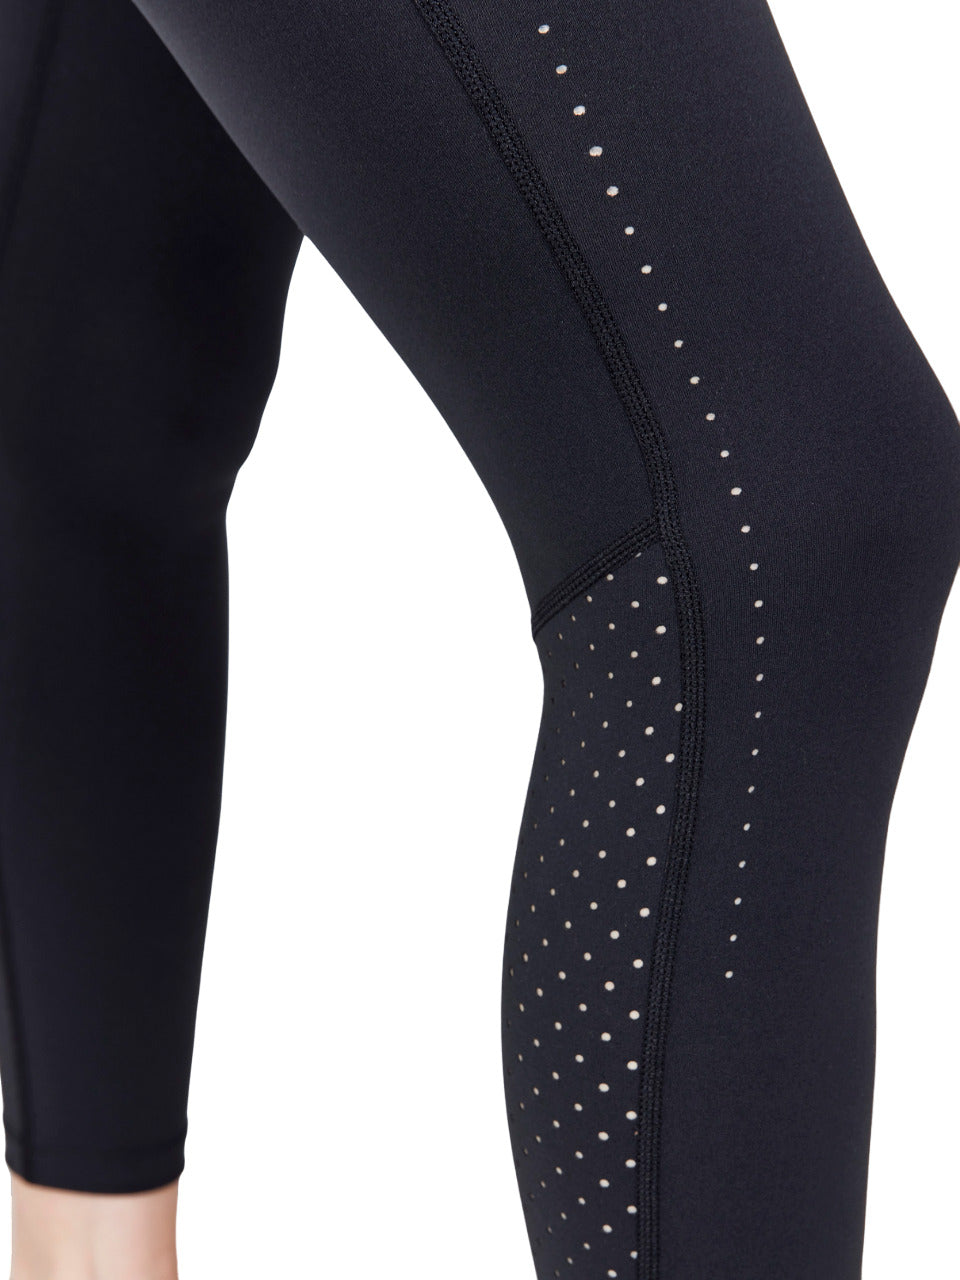 Craft ADV Essence Perforated Tights - Women's